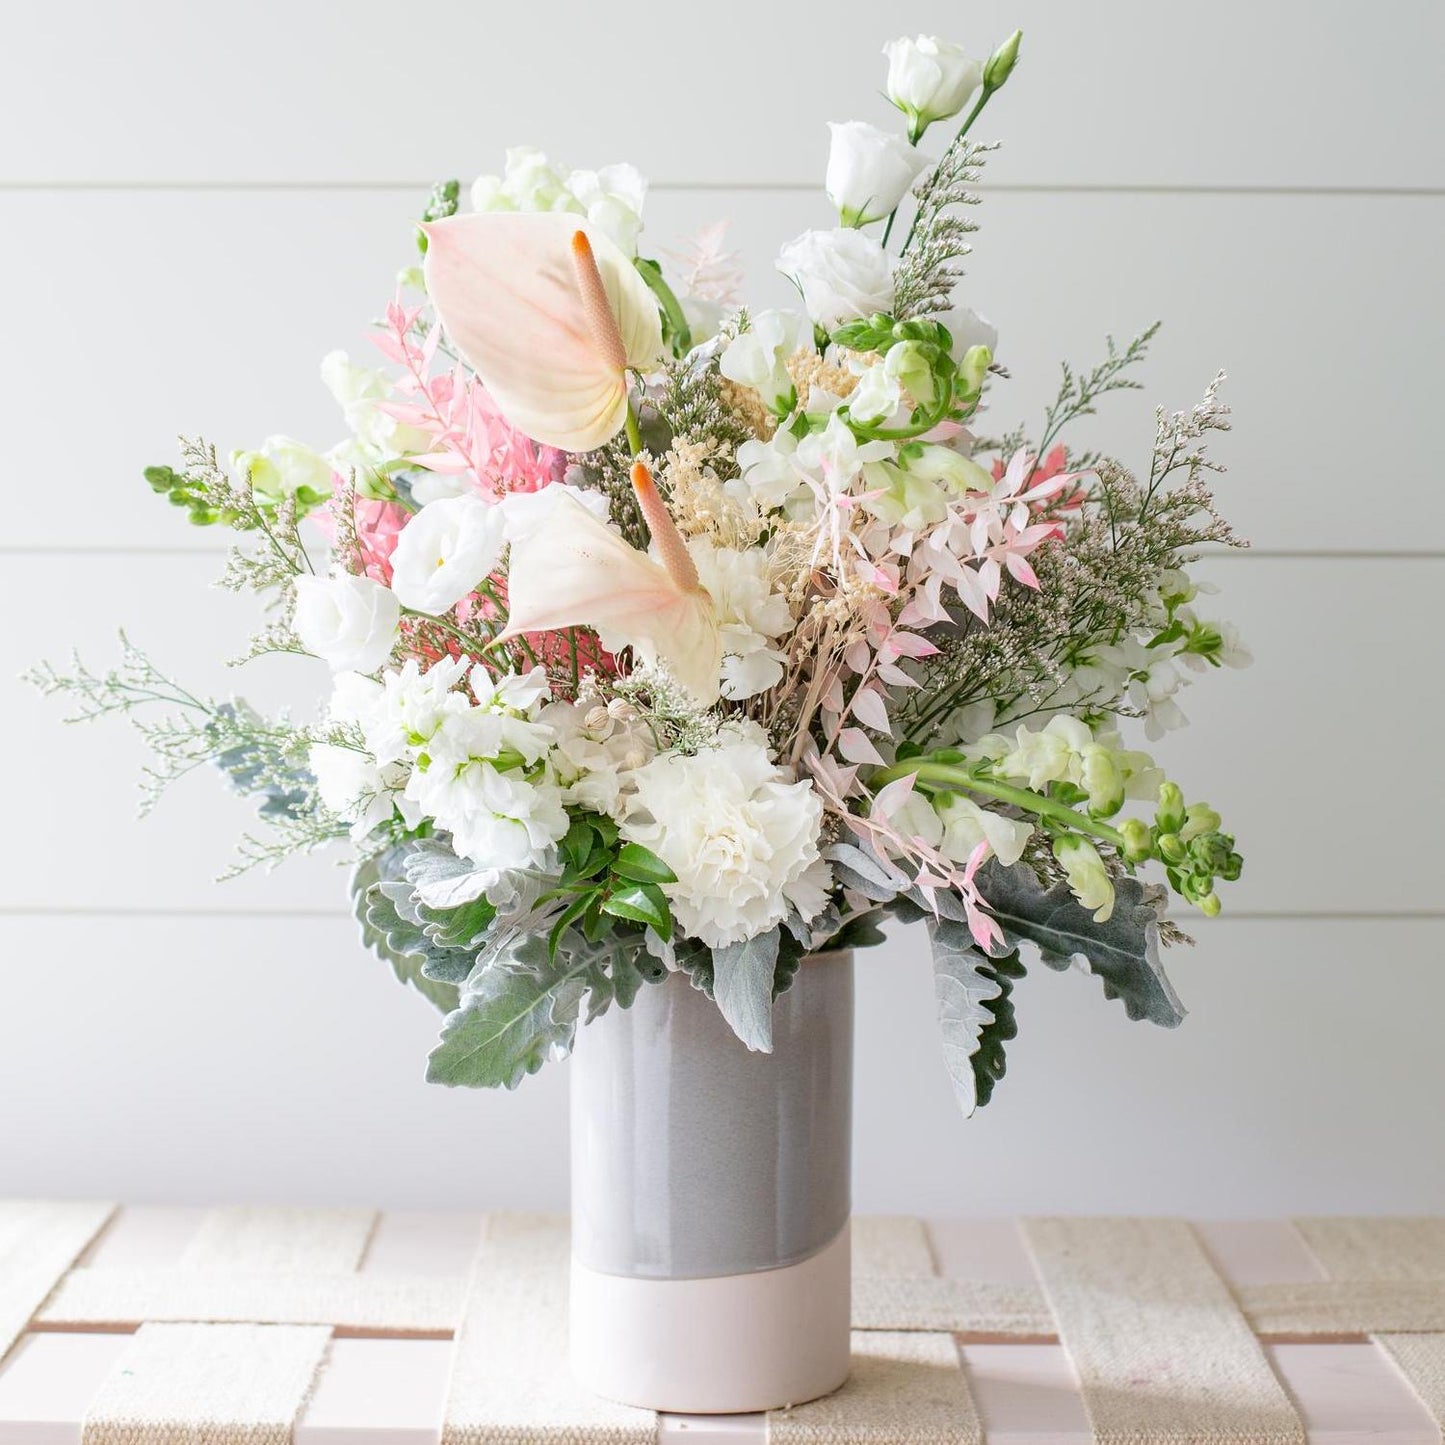 A lush bouquet of flowers, featuring pale pink calla lilies, white roses, and an assortment of greenery and filler flowers, is elegantly arranged in a grey ceramic essential vase placed on a light-colored wooden surface against a white horizontal panel backdrop.